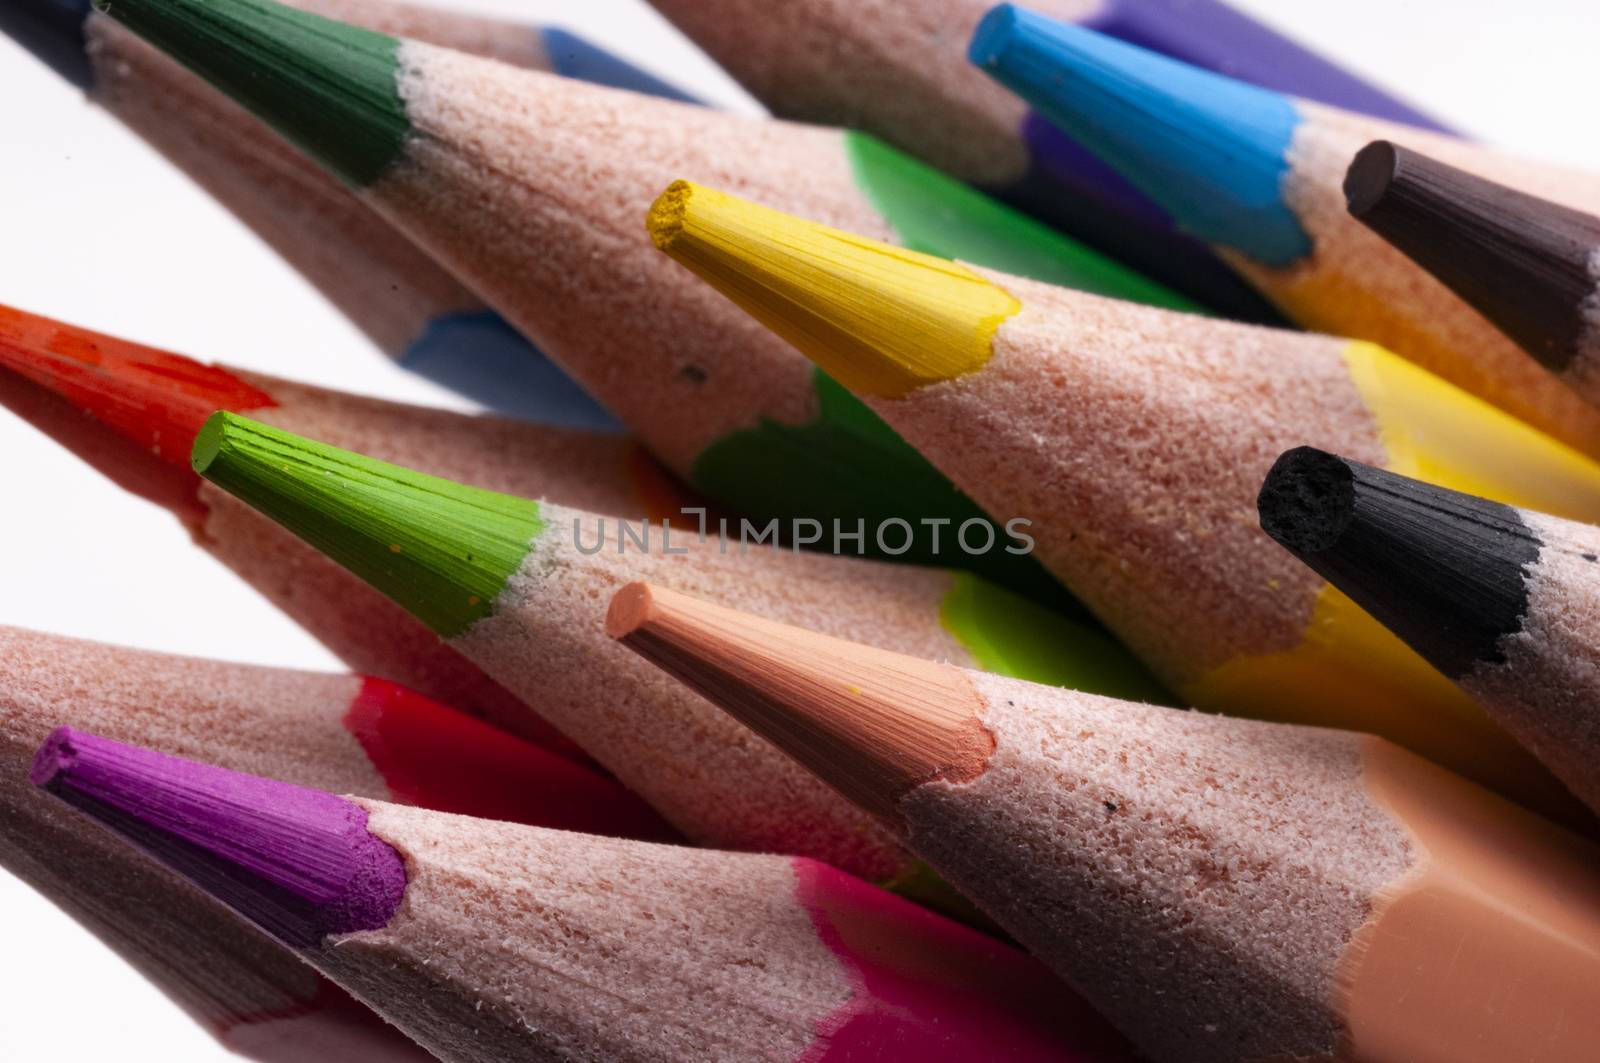 Diagonal clorful pencil close up view by Haspion